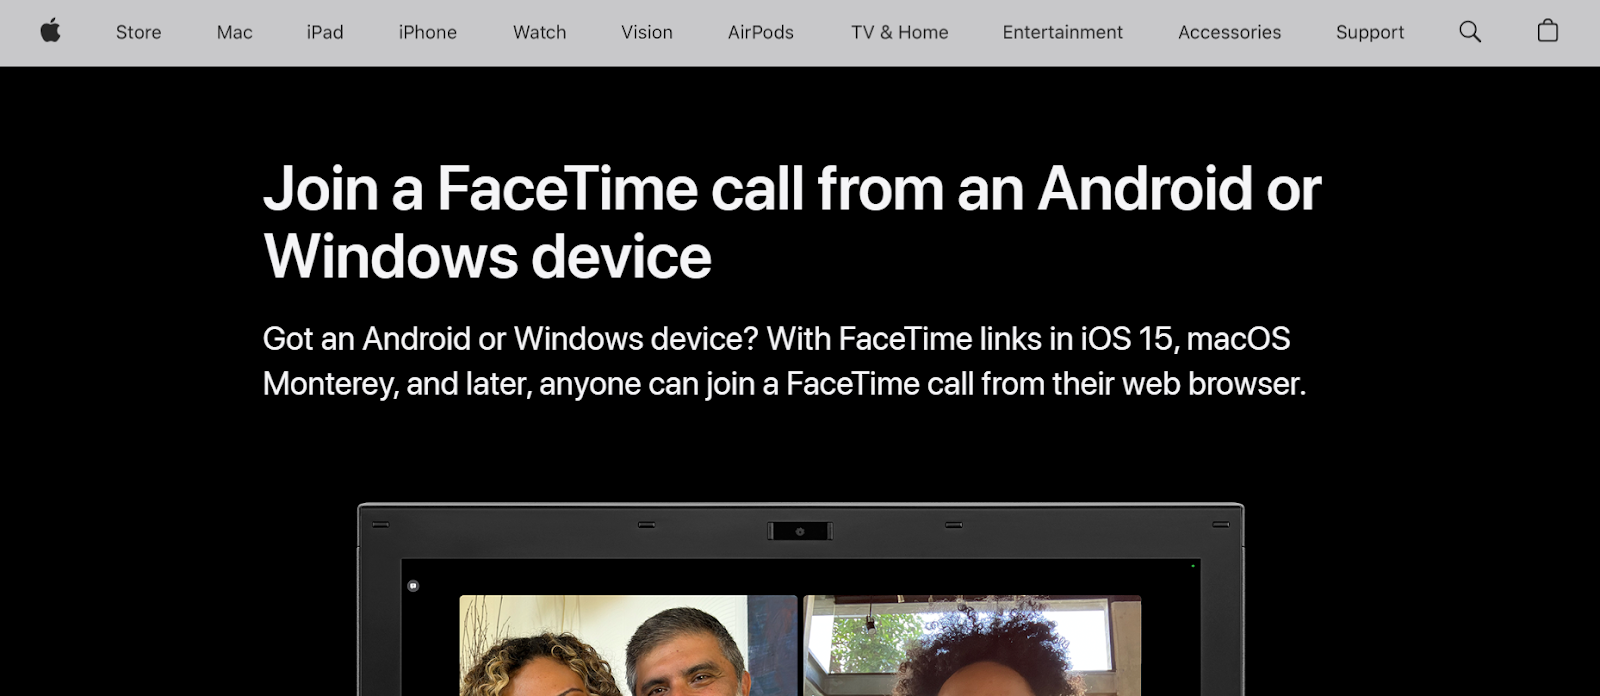 FaceTime website snapshot highlighting the services it offers.